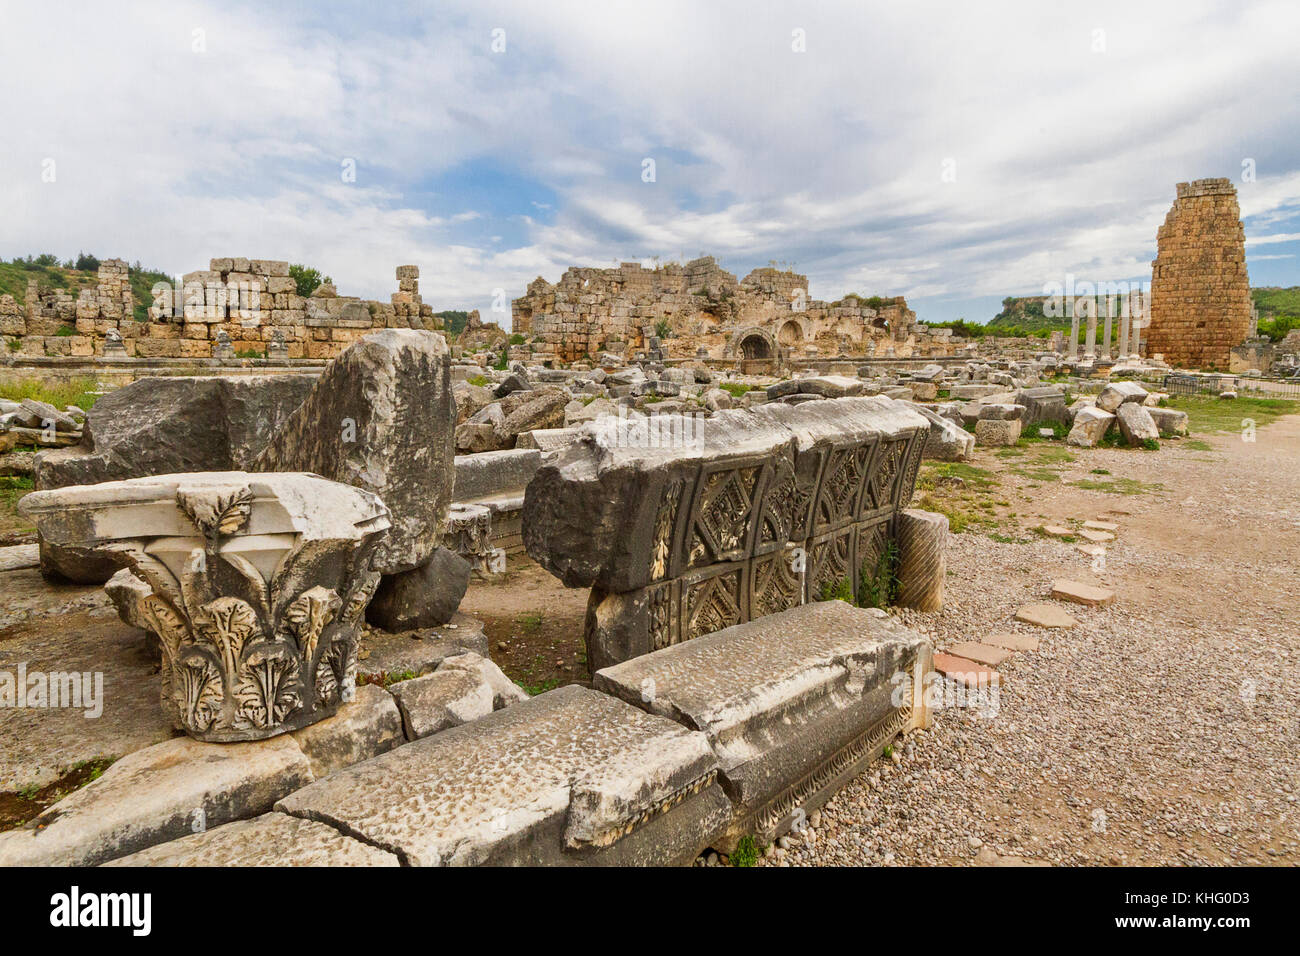 Ruins of the ancient site of Perge in Antalya, Turkey. Stock Photo